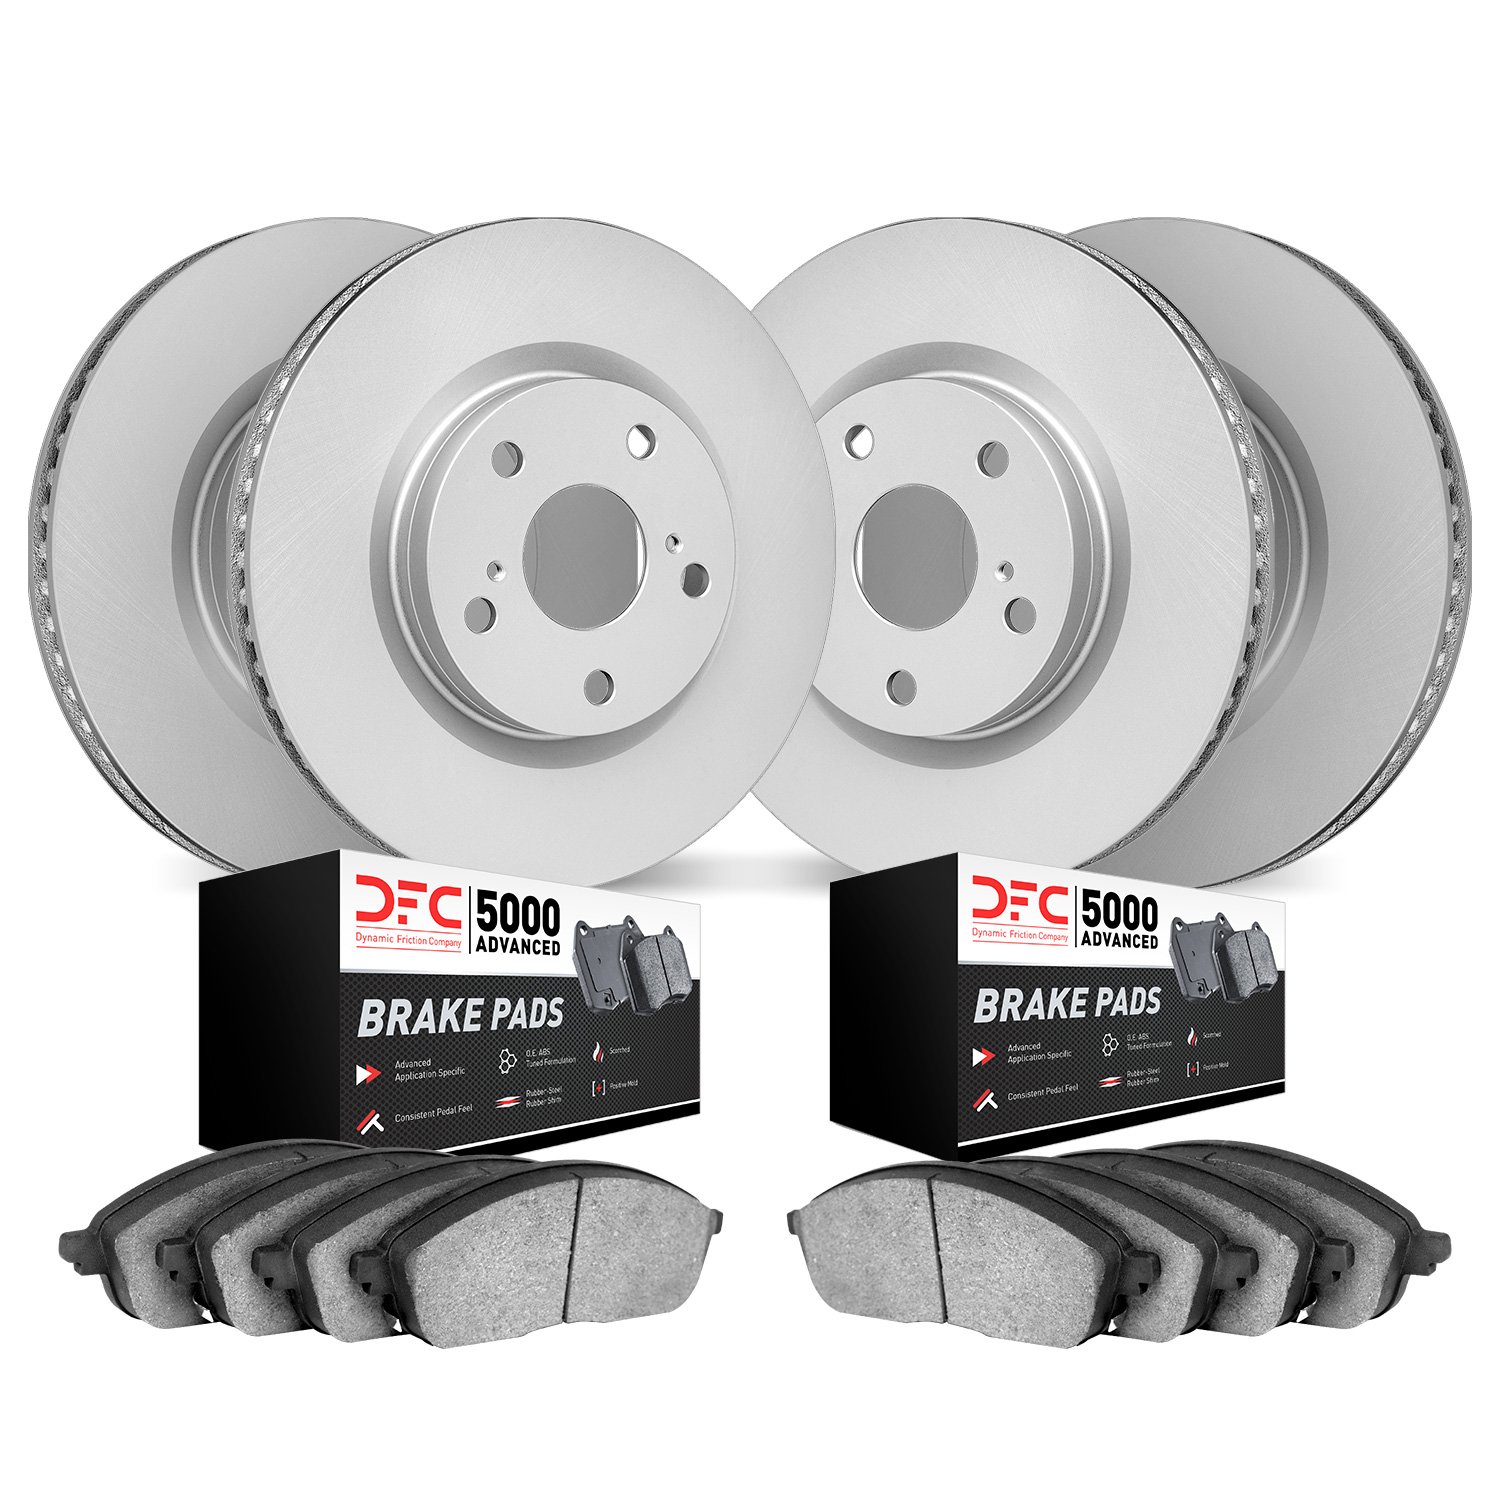 4504-46018 Geospec Brake Rotors w/5000 Advanced Brake Pads Kit, 2009-2011 GM, Position: Front and Rear